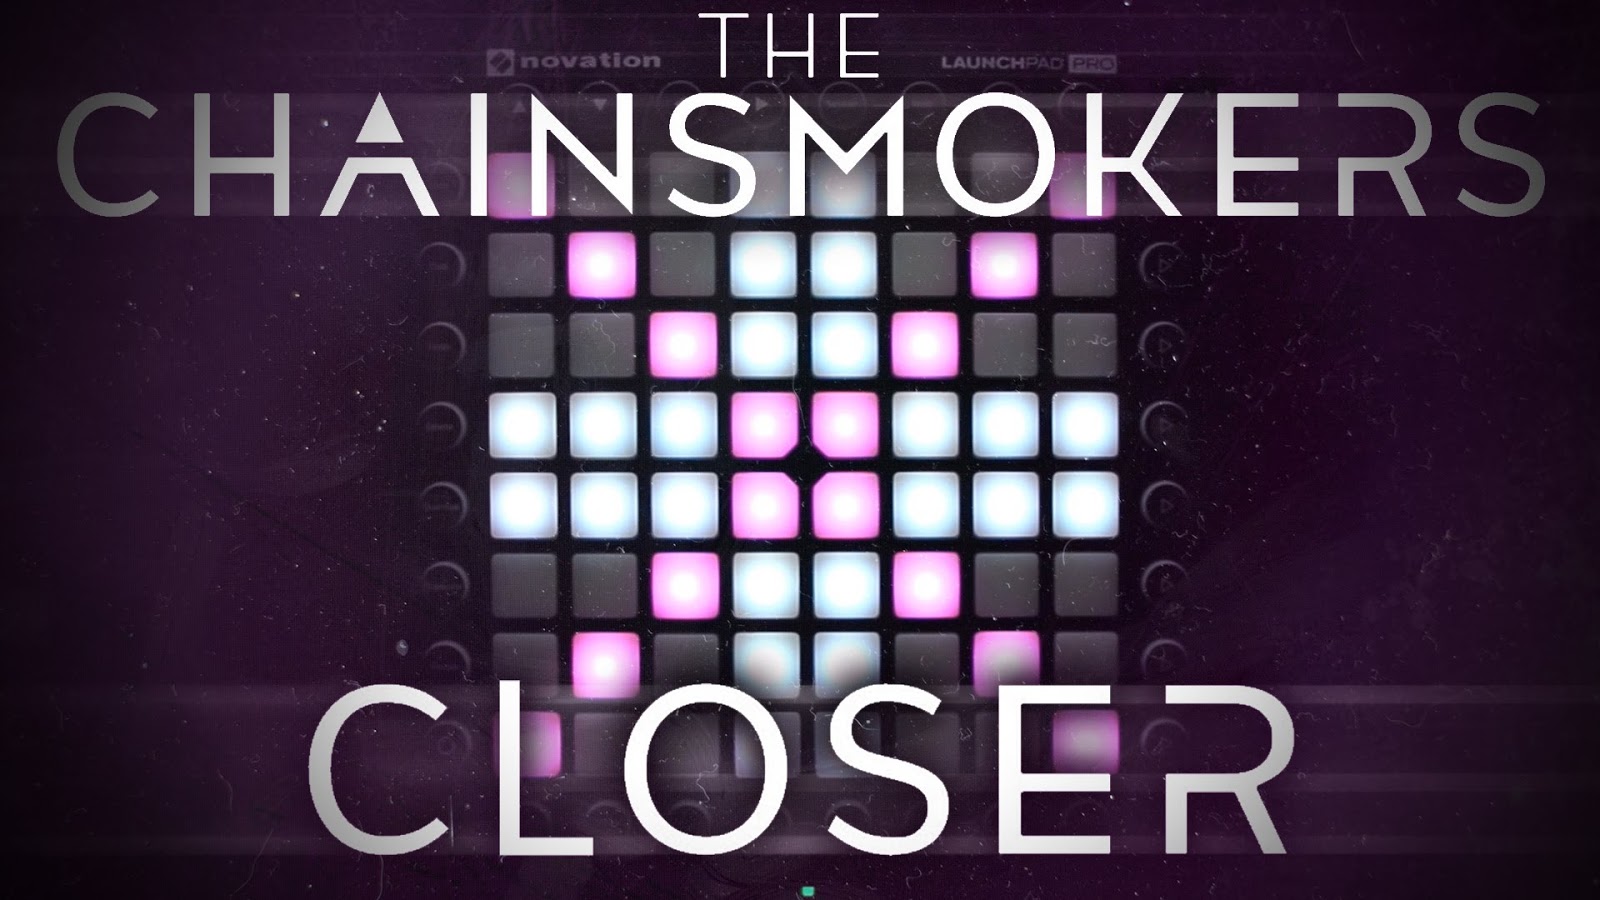 Closer the chainsmokers. Launchpad Cover. Кавер Проджект. Come closer records.